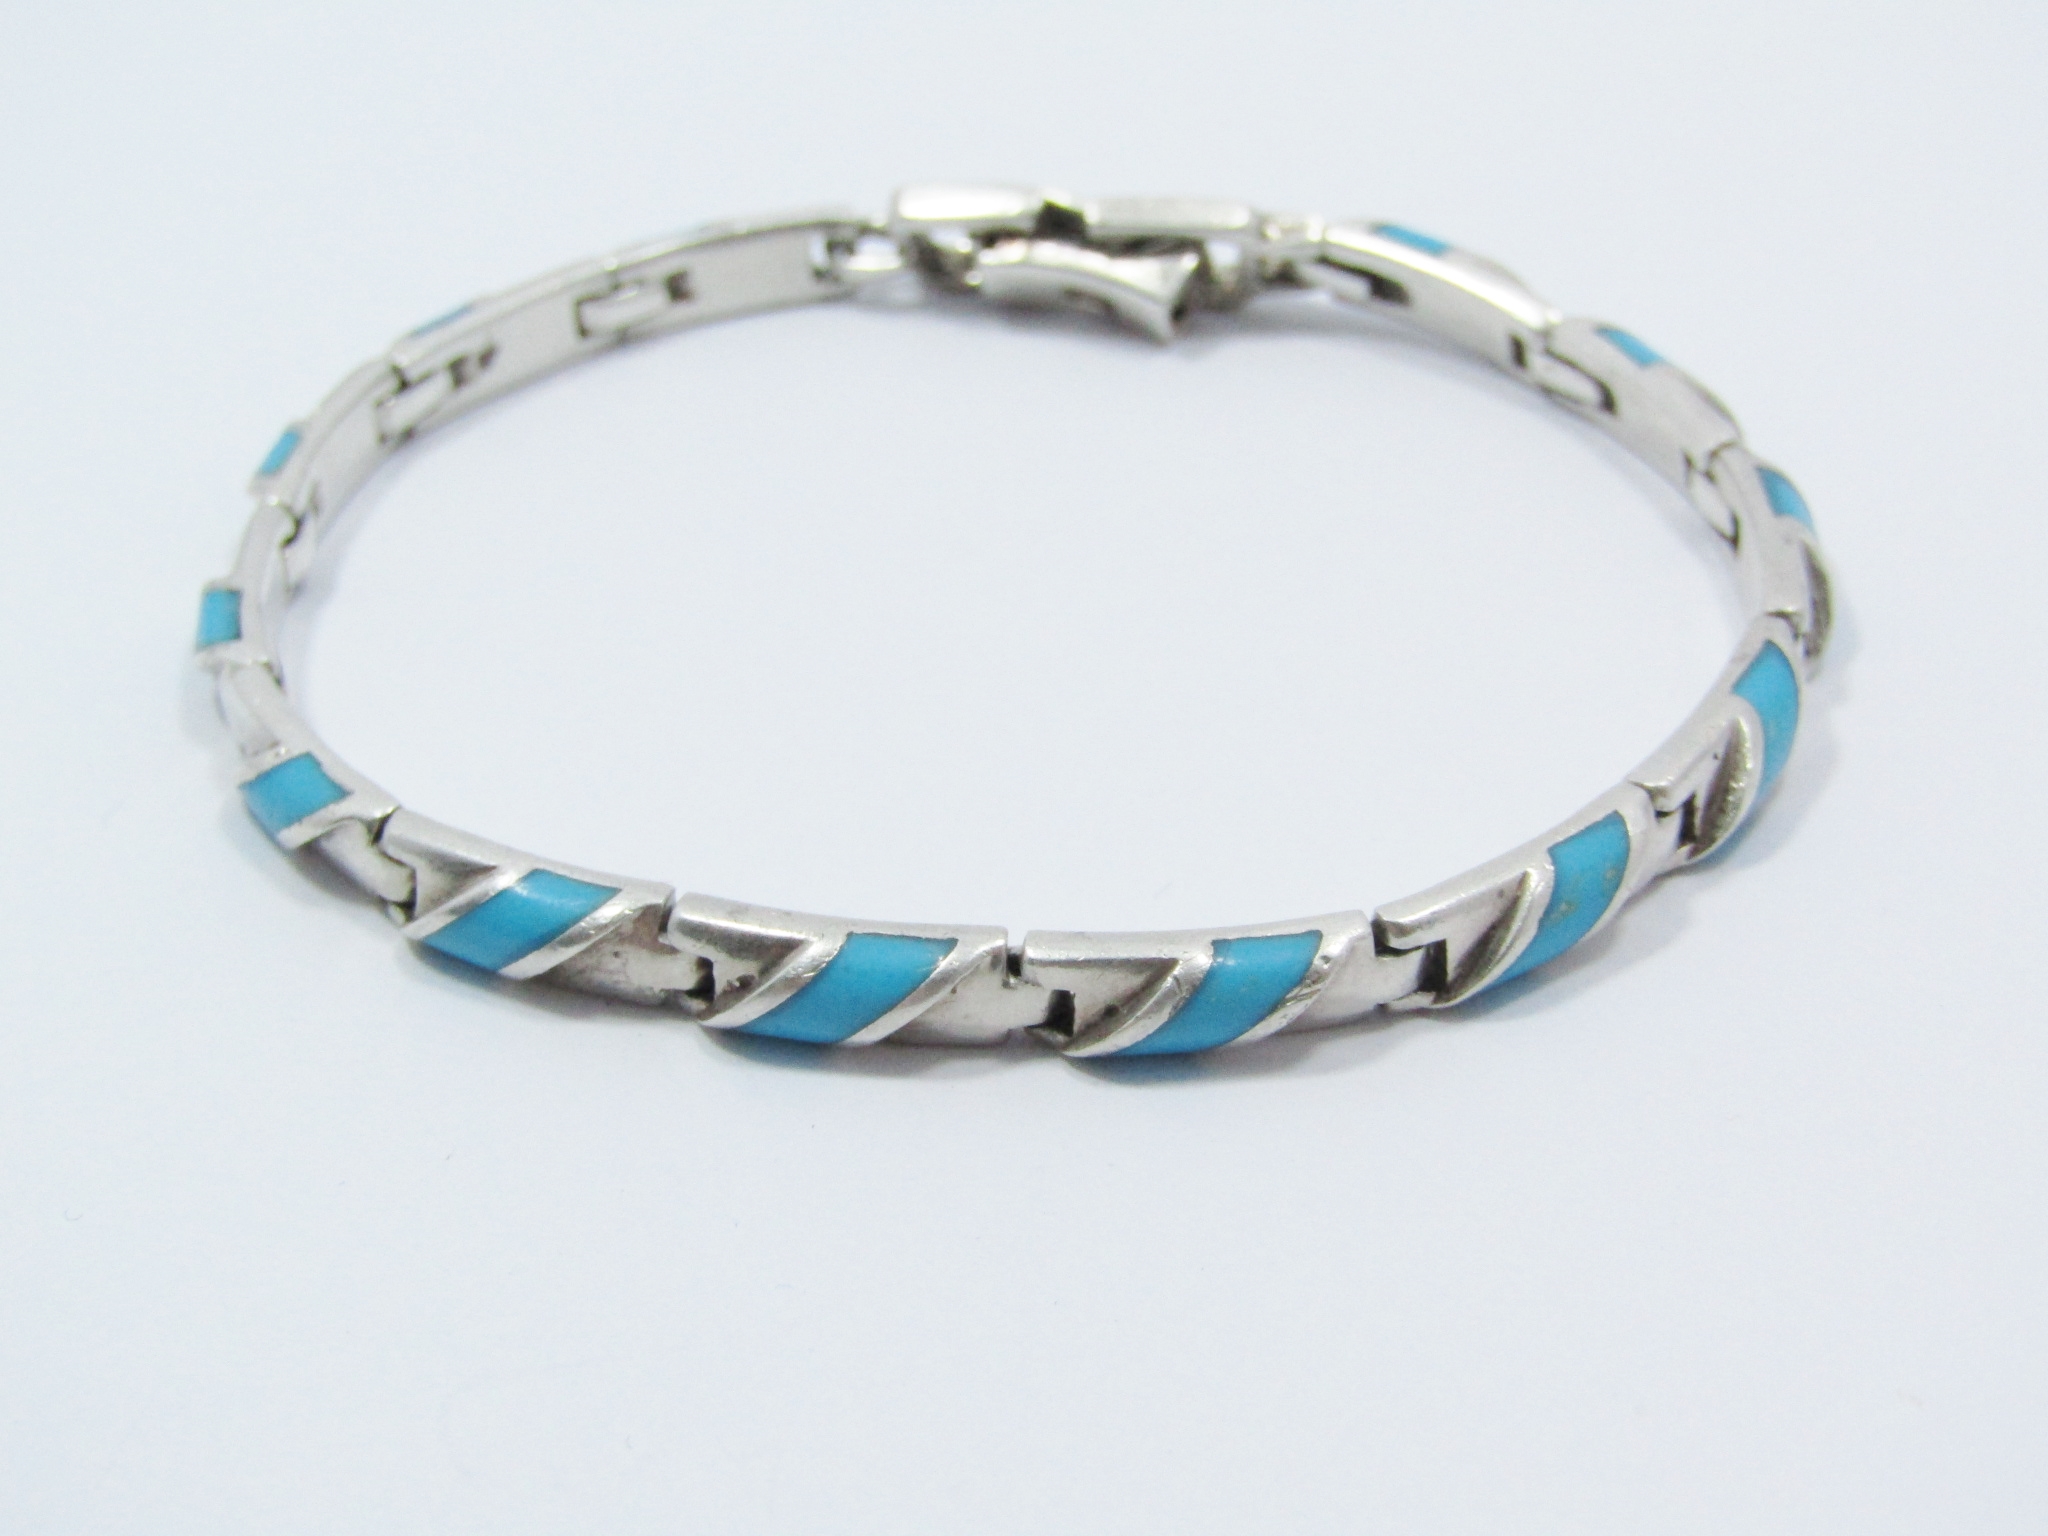 A Gorgeous Paneled Bracelet With a Turquois Inlay in Sterling Silver.